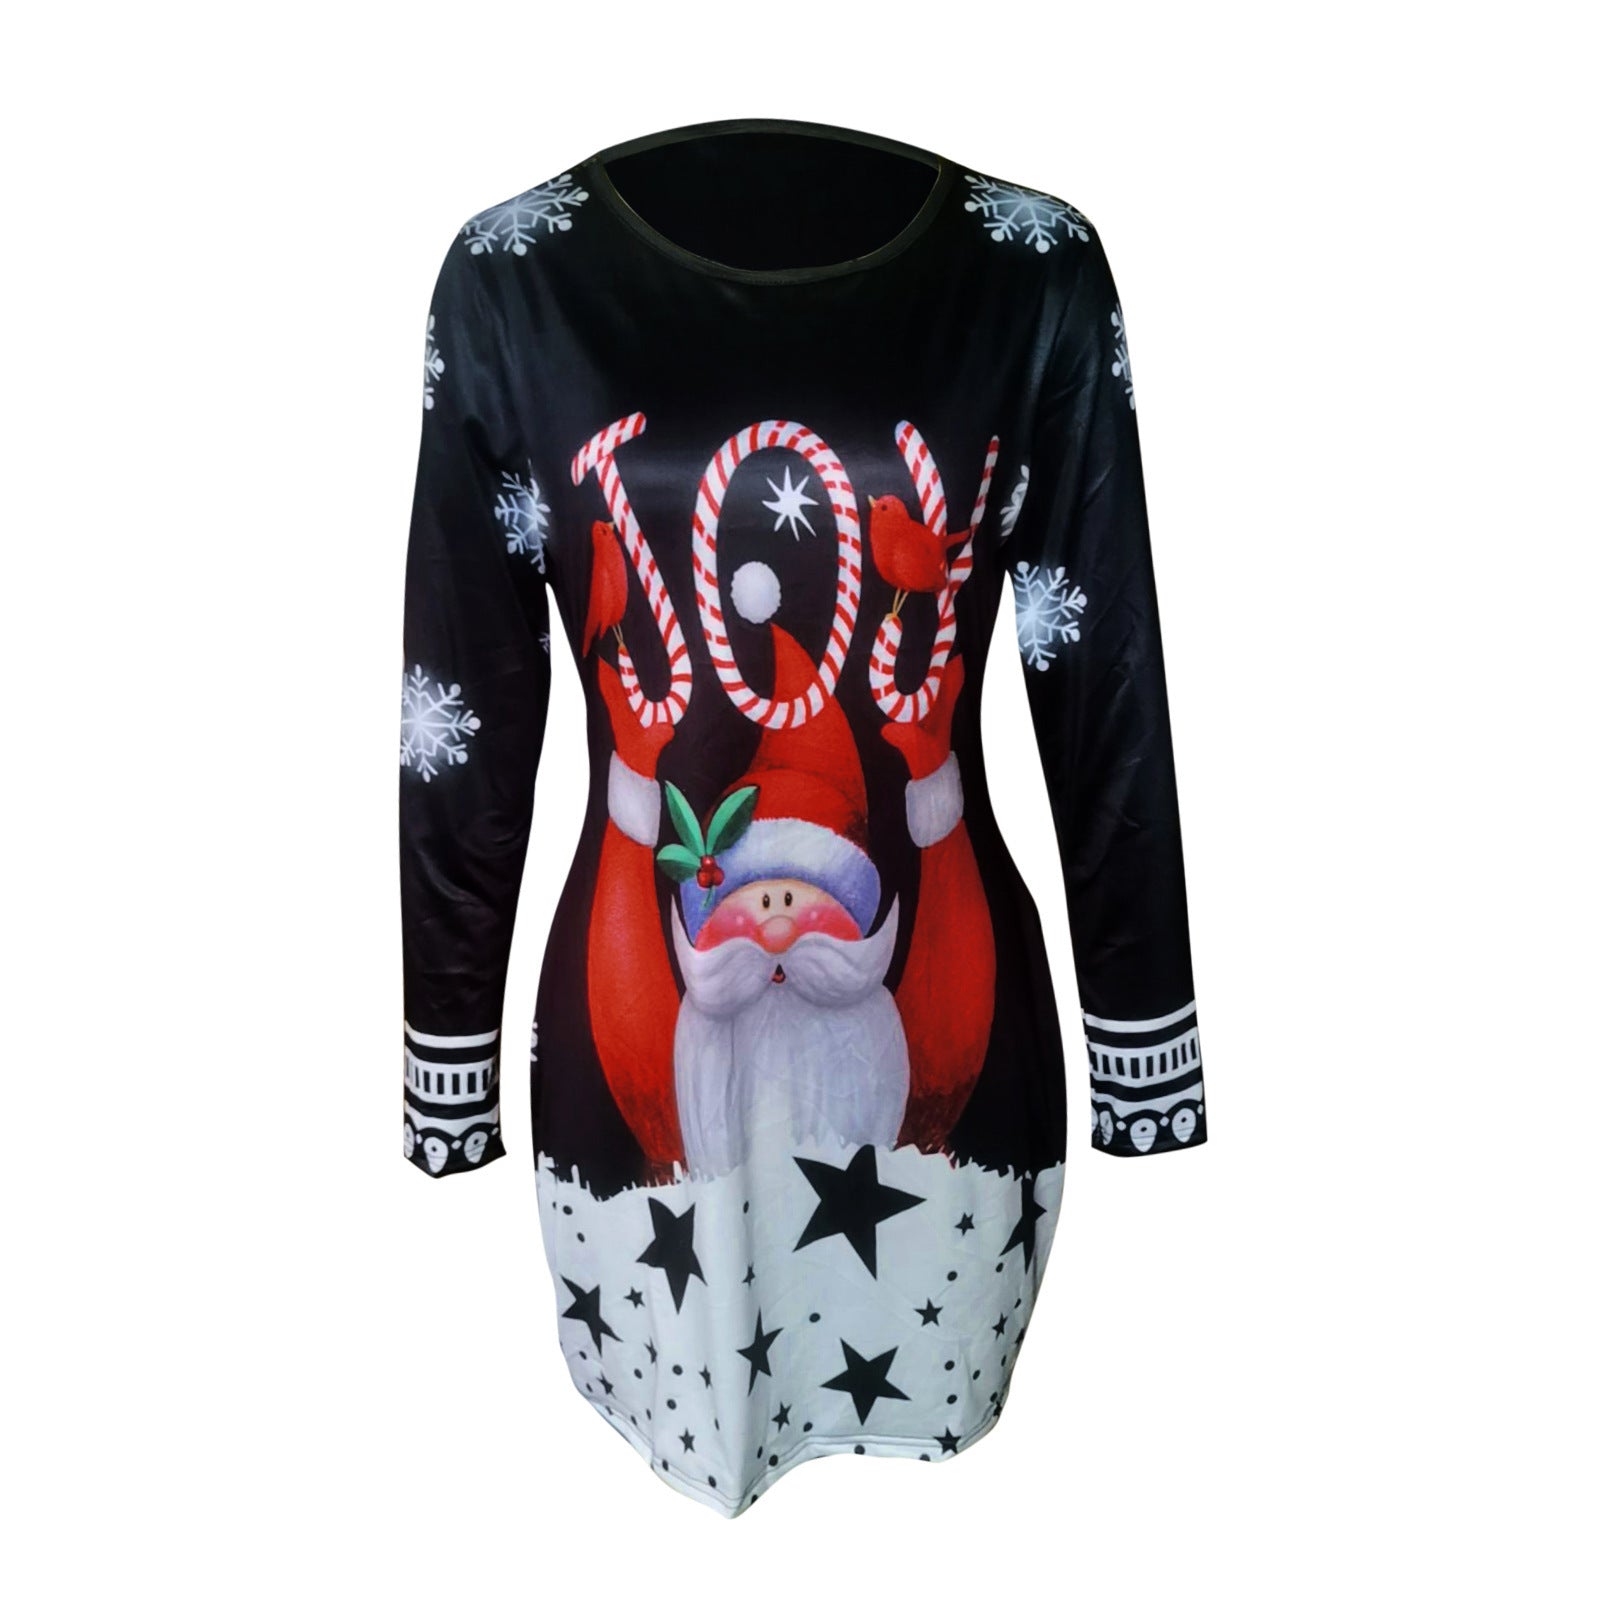 Long Sleeve Round Neck Pullover Christmas Print Dress